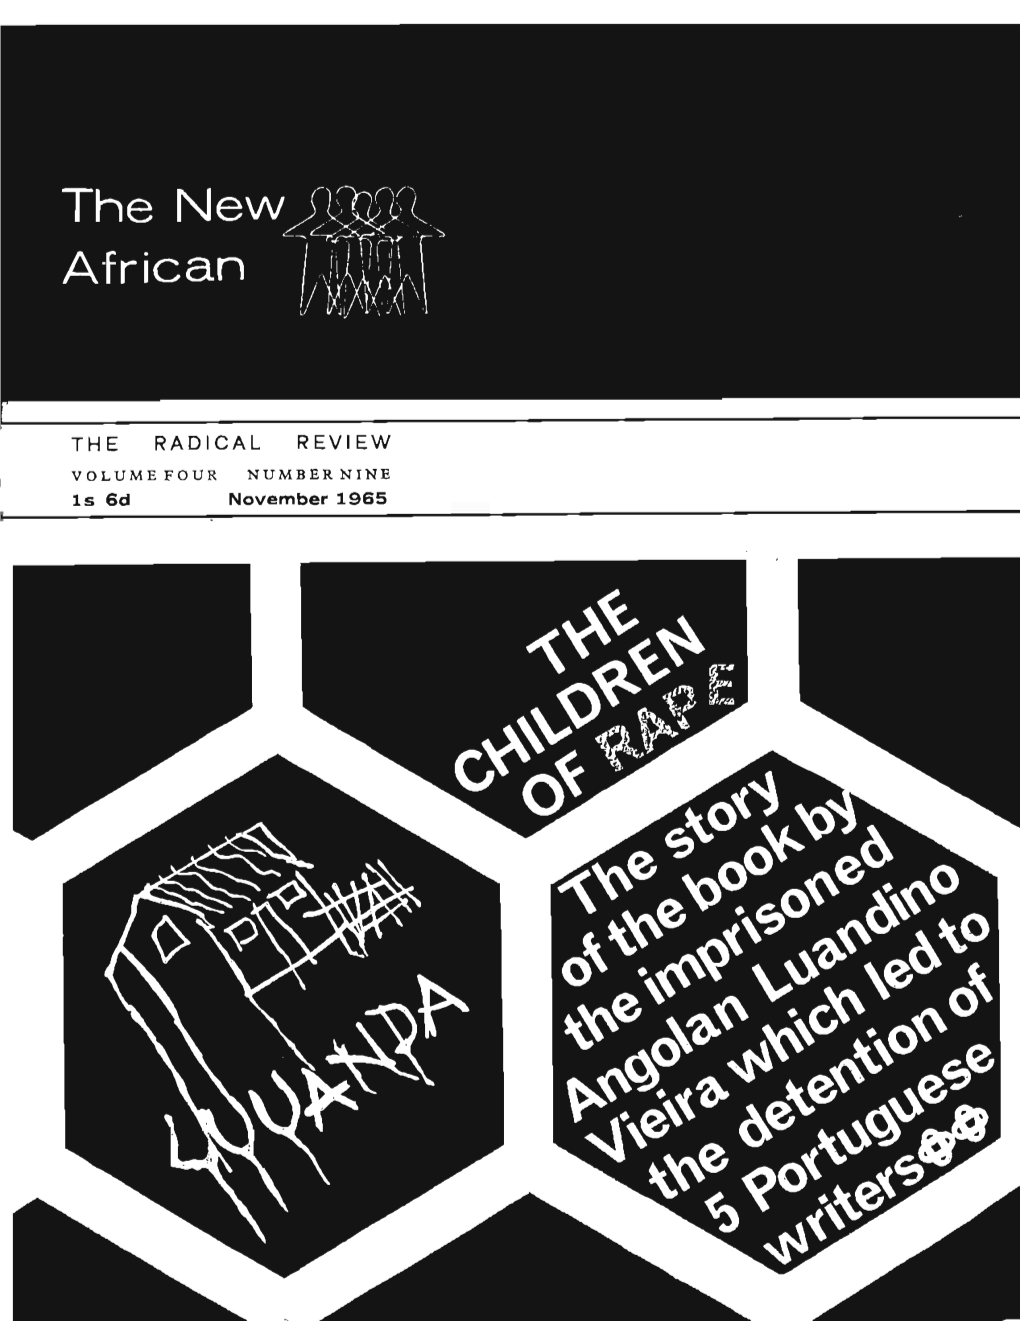 THE RADICAL REVIEW VOLUME FOUR NUMBER NINE 1 S 6D November 1965 202/THE NEW AFRICAN/NOVEMBER 1965